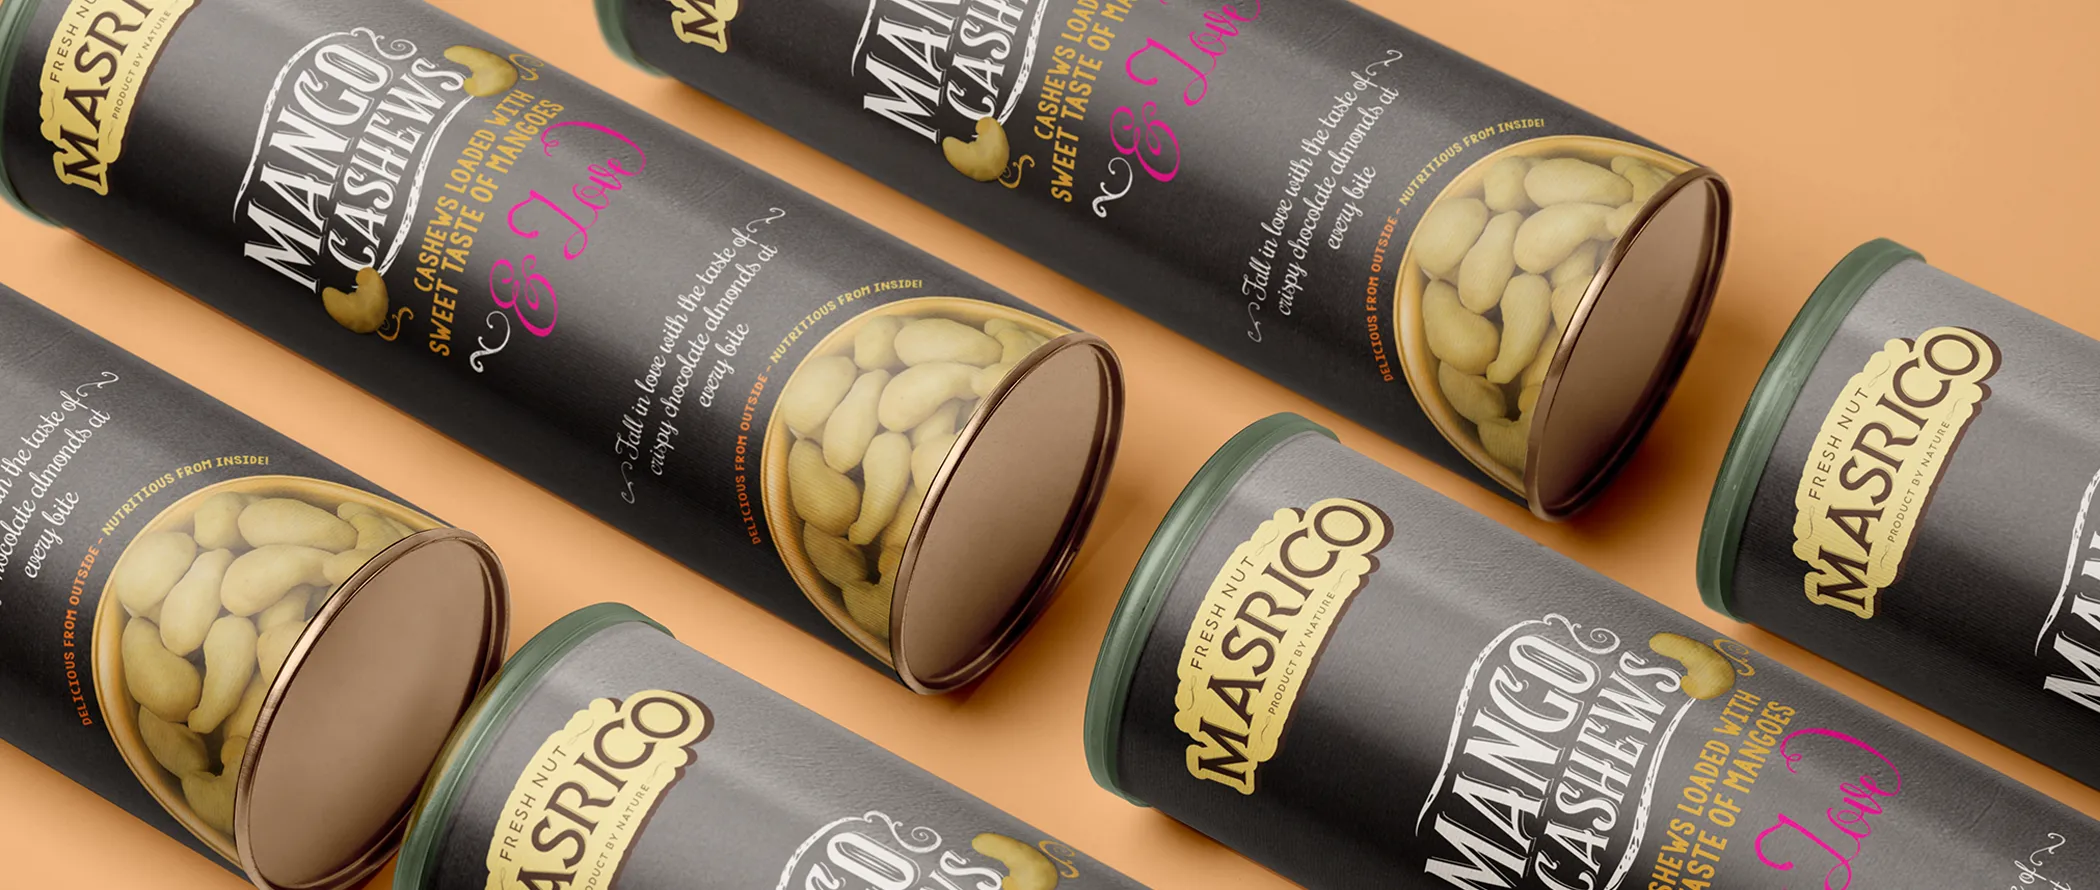 MAsrico paper tube packaging design 3 copy